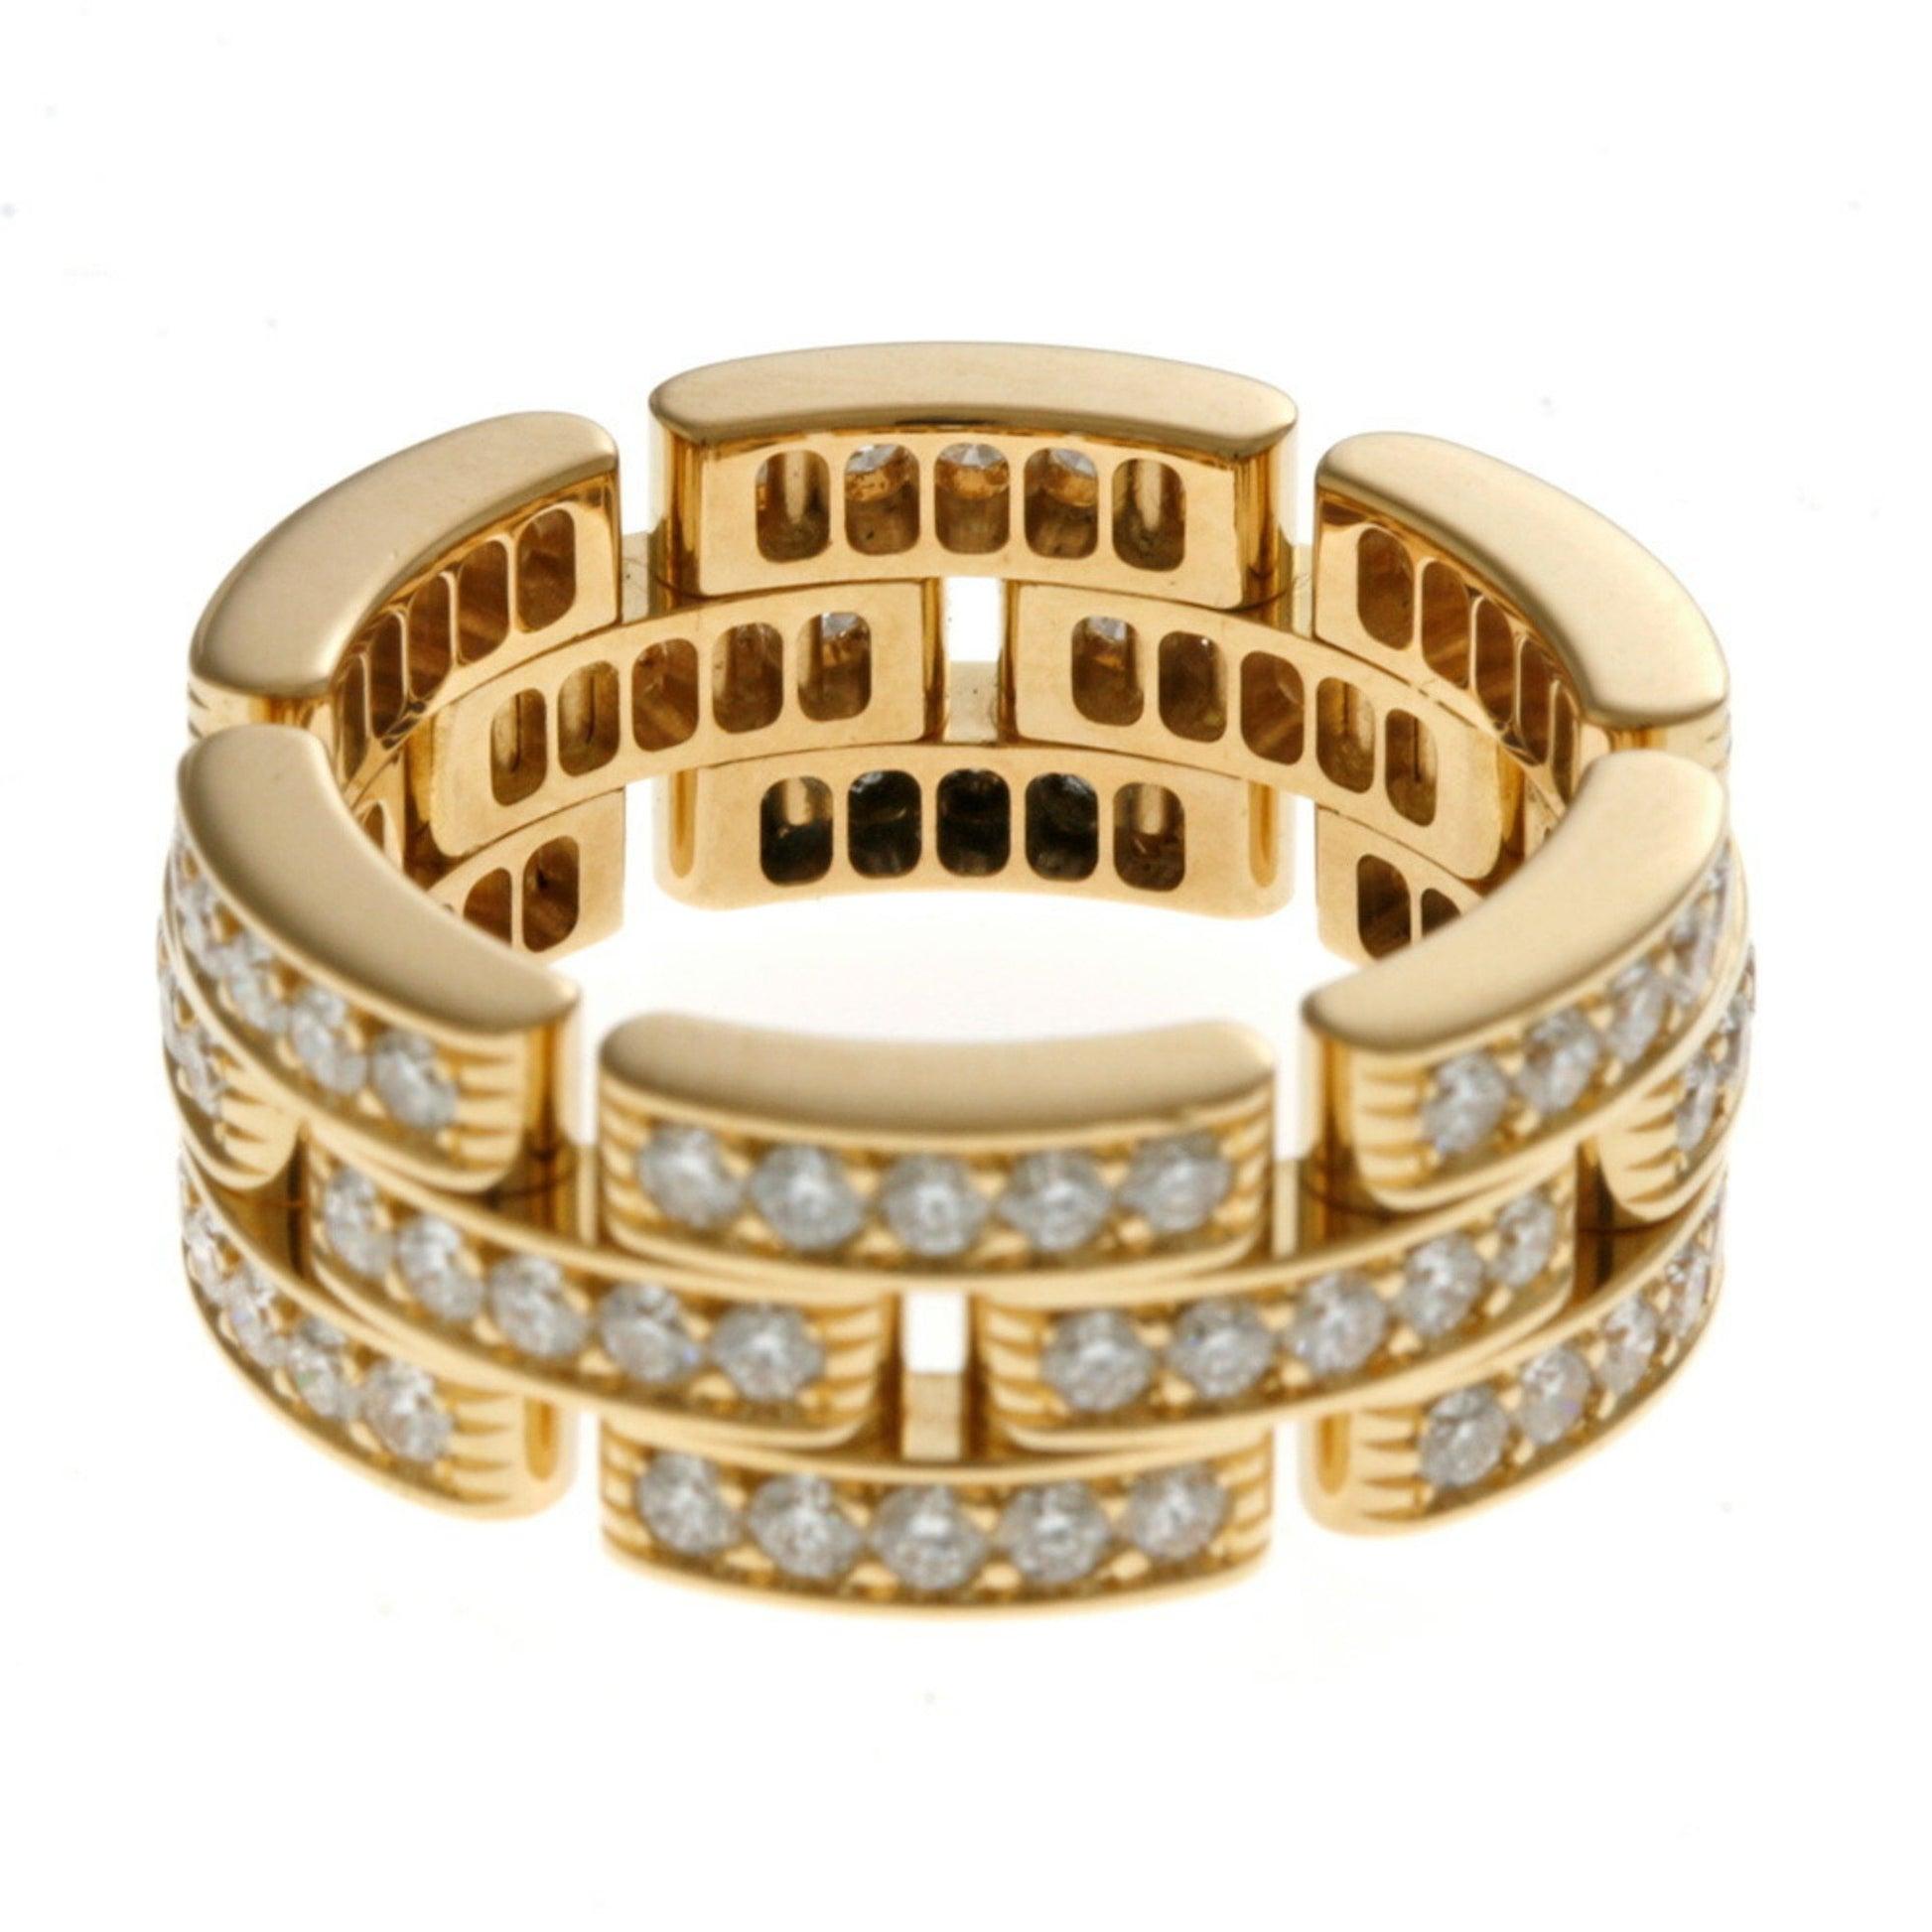 Cartier Mailon Panthere Diamond Ring in 18K Yellow Gold For Sale 1